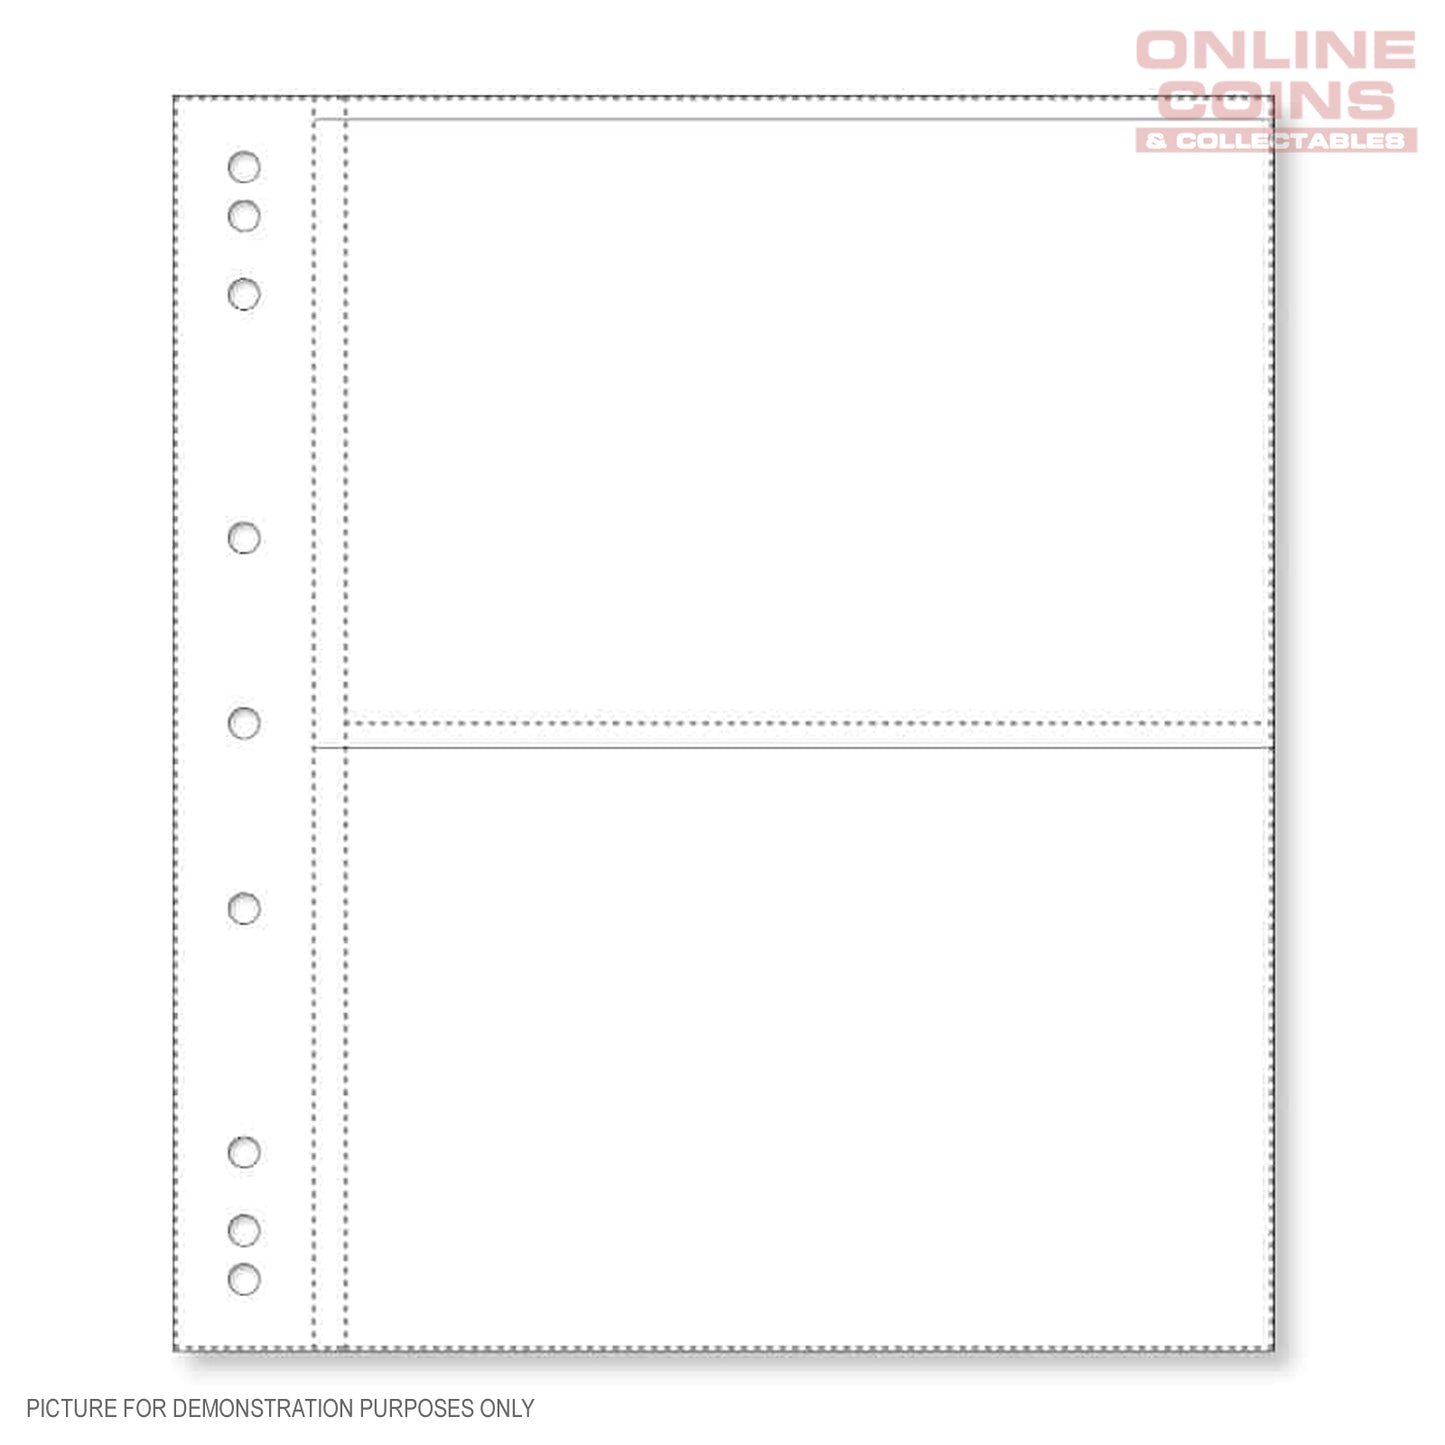 Renniks Banknote Album Plastic Refill Pages - 2 Pockets - Pack of 10